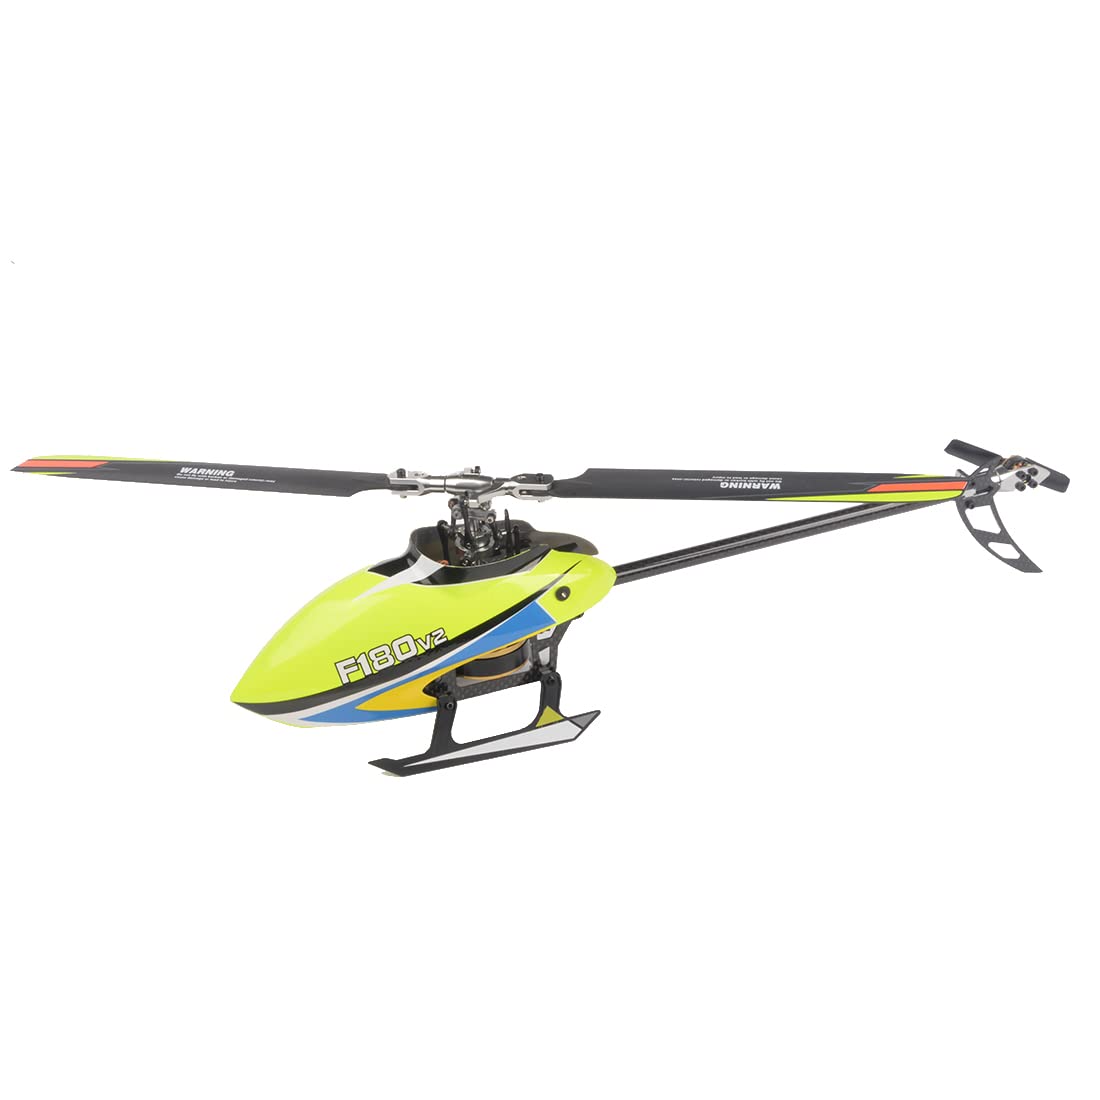 High-End F180V2S Electric 8CH Brushless FPV Camera Radio Control Flybarless Helicopter With VR Version Featured Image